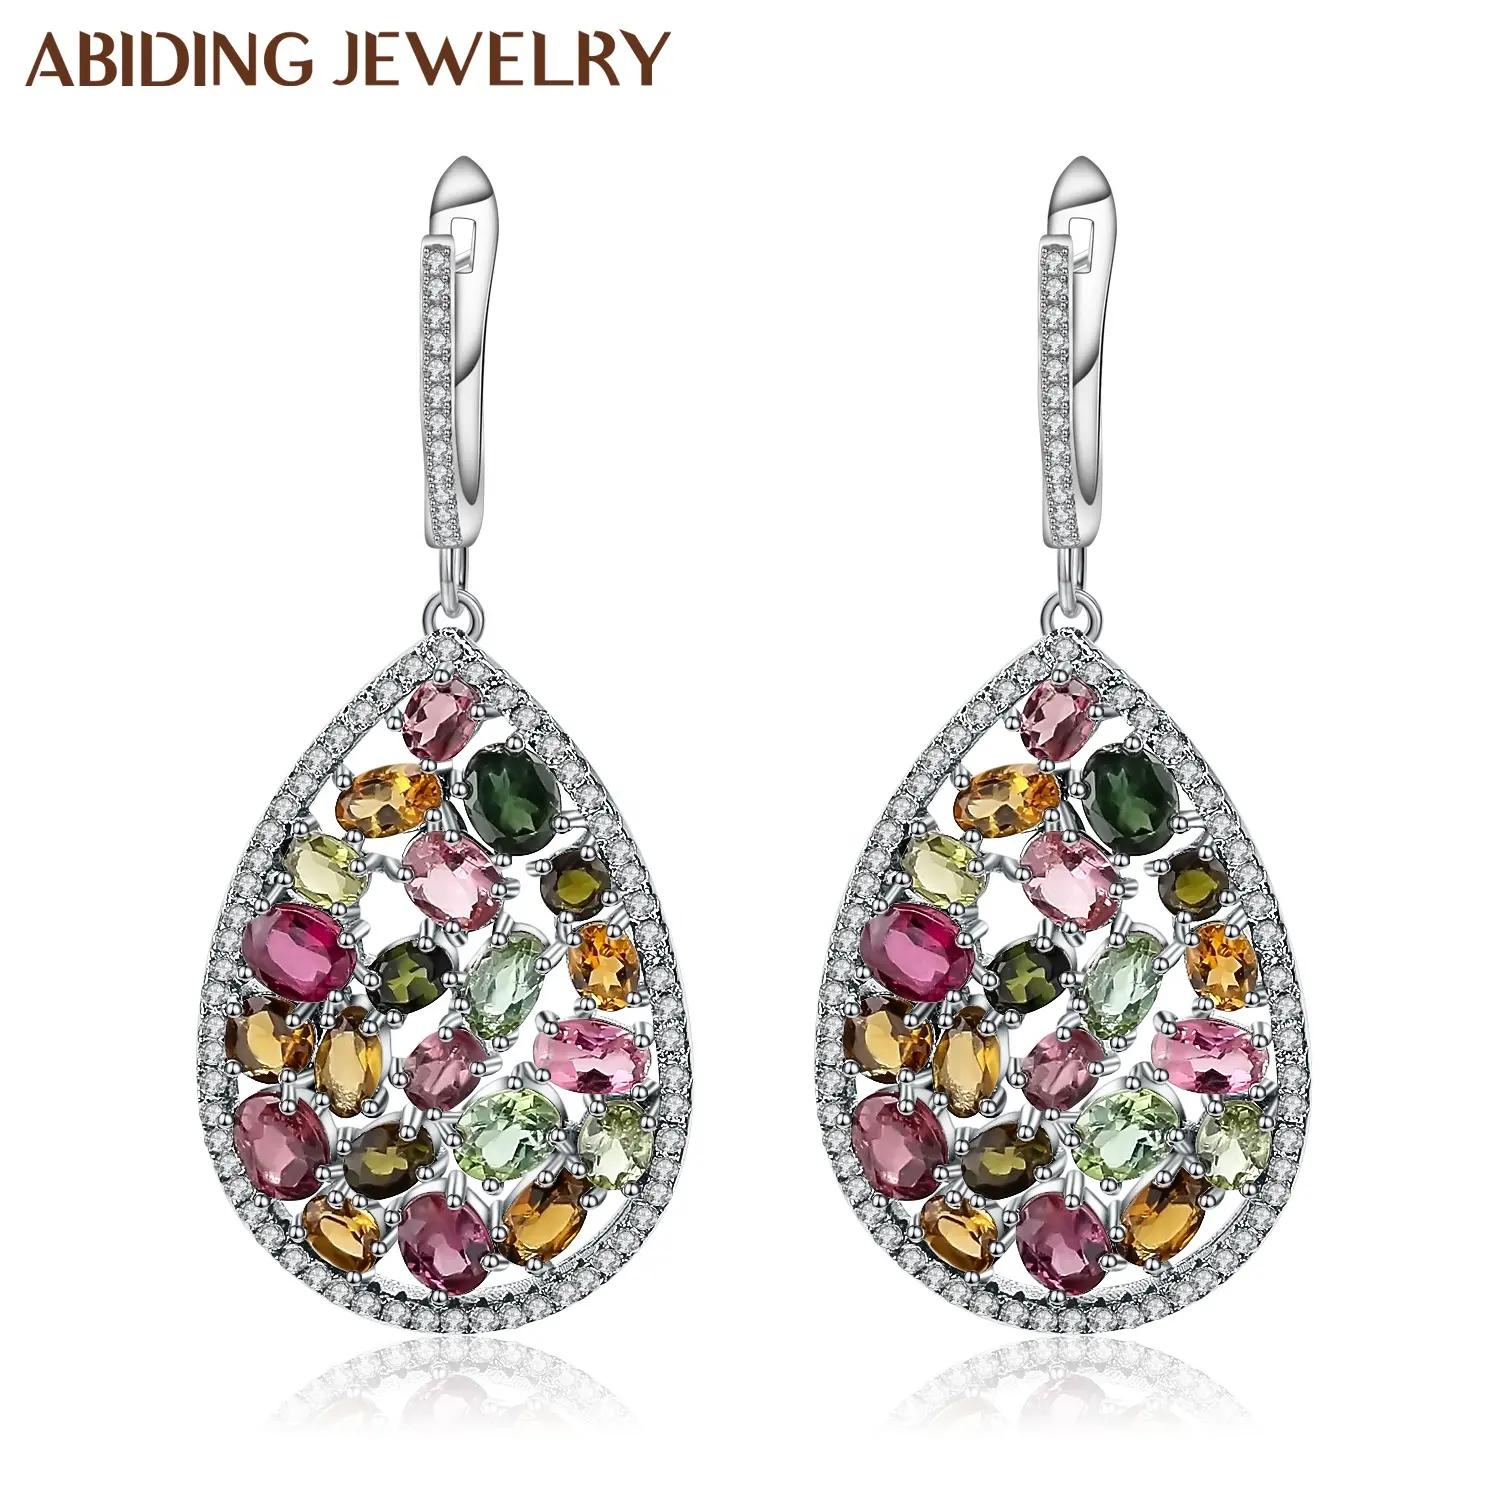 Abiding New Design Colorful Natural Tourmaline Drop Earrings Unique Gift 925 Sterling Silver Drop Earrings Jewelry Women